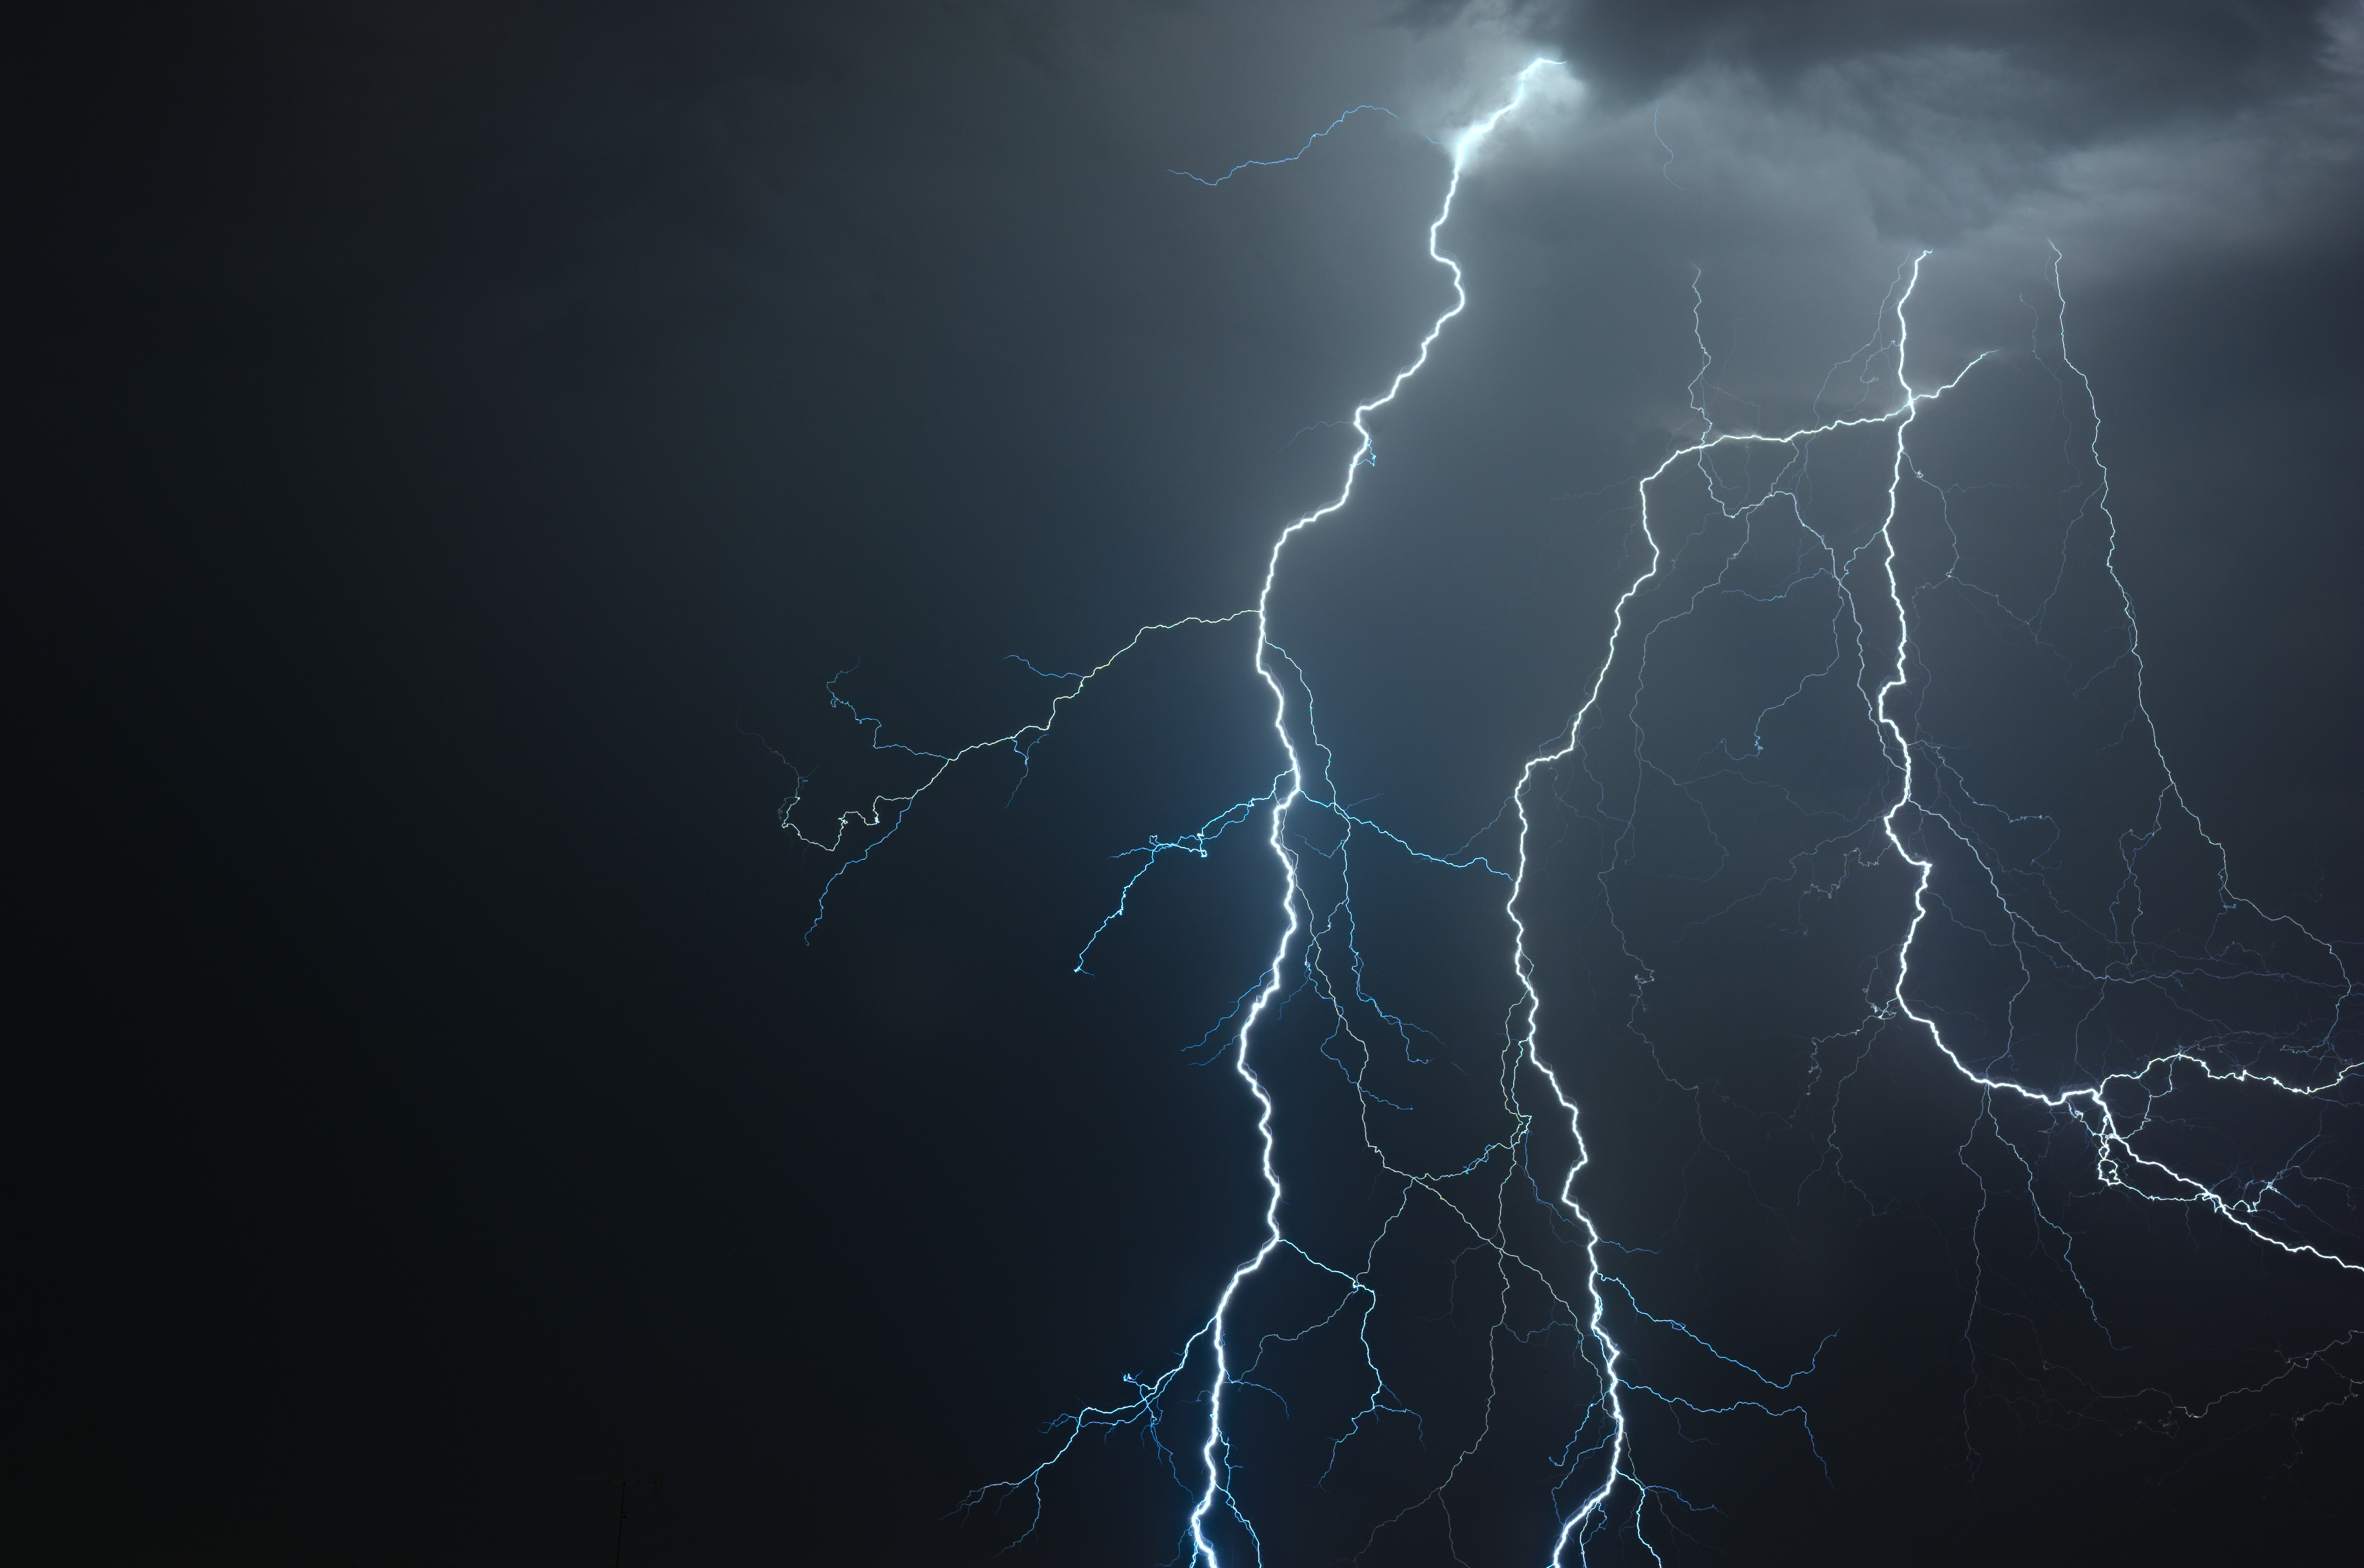 General 4276x2836 clouds lightning long exposure night nature storm sky simple background minimalism photography